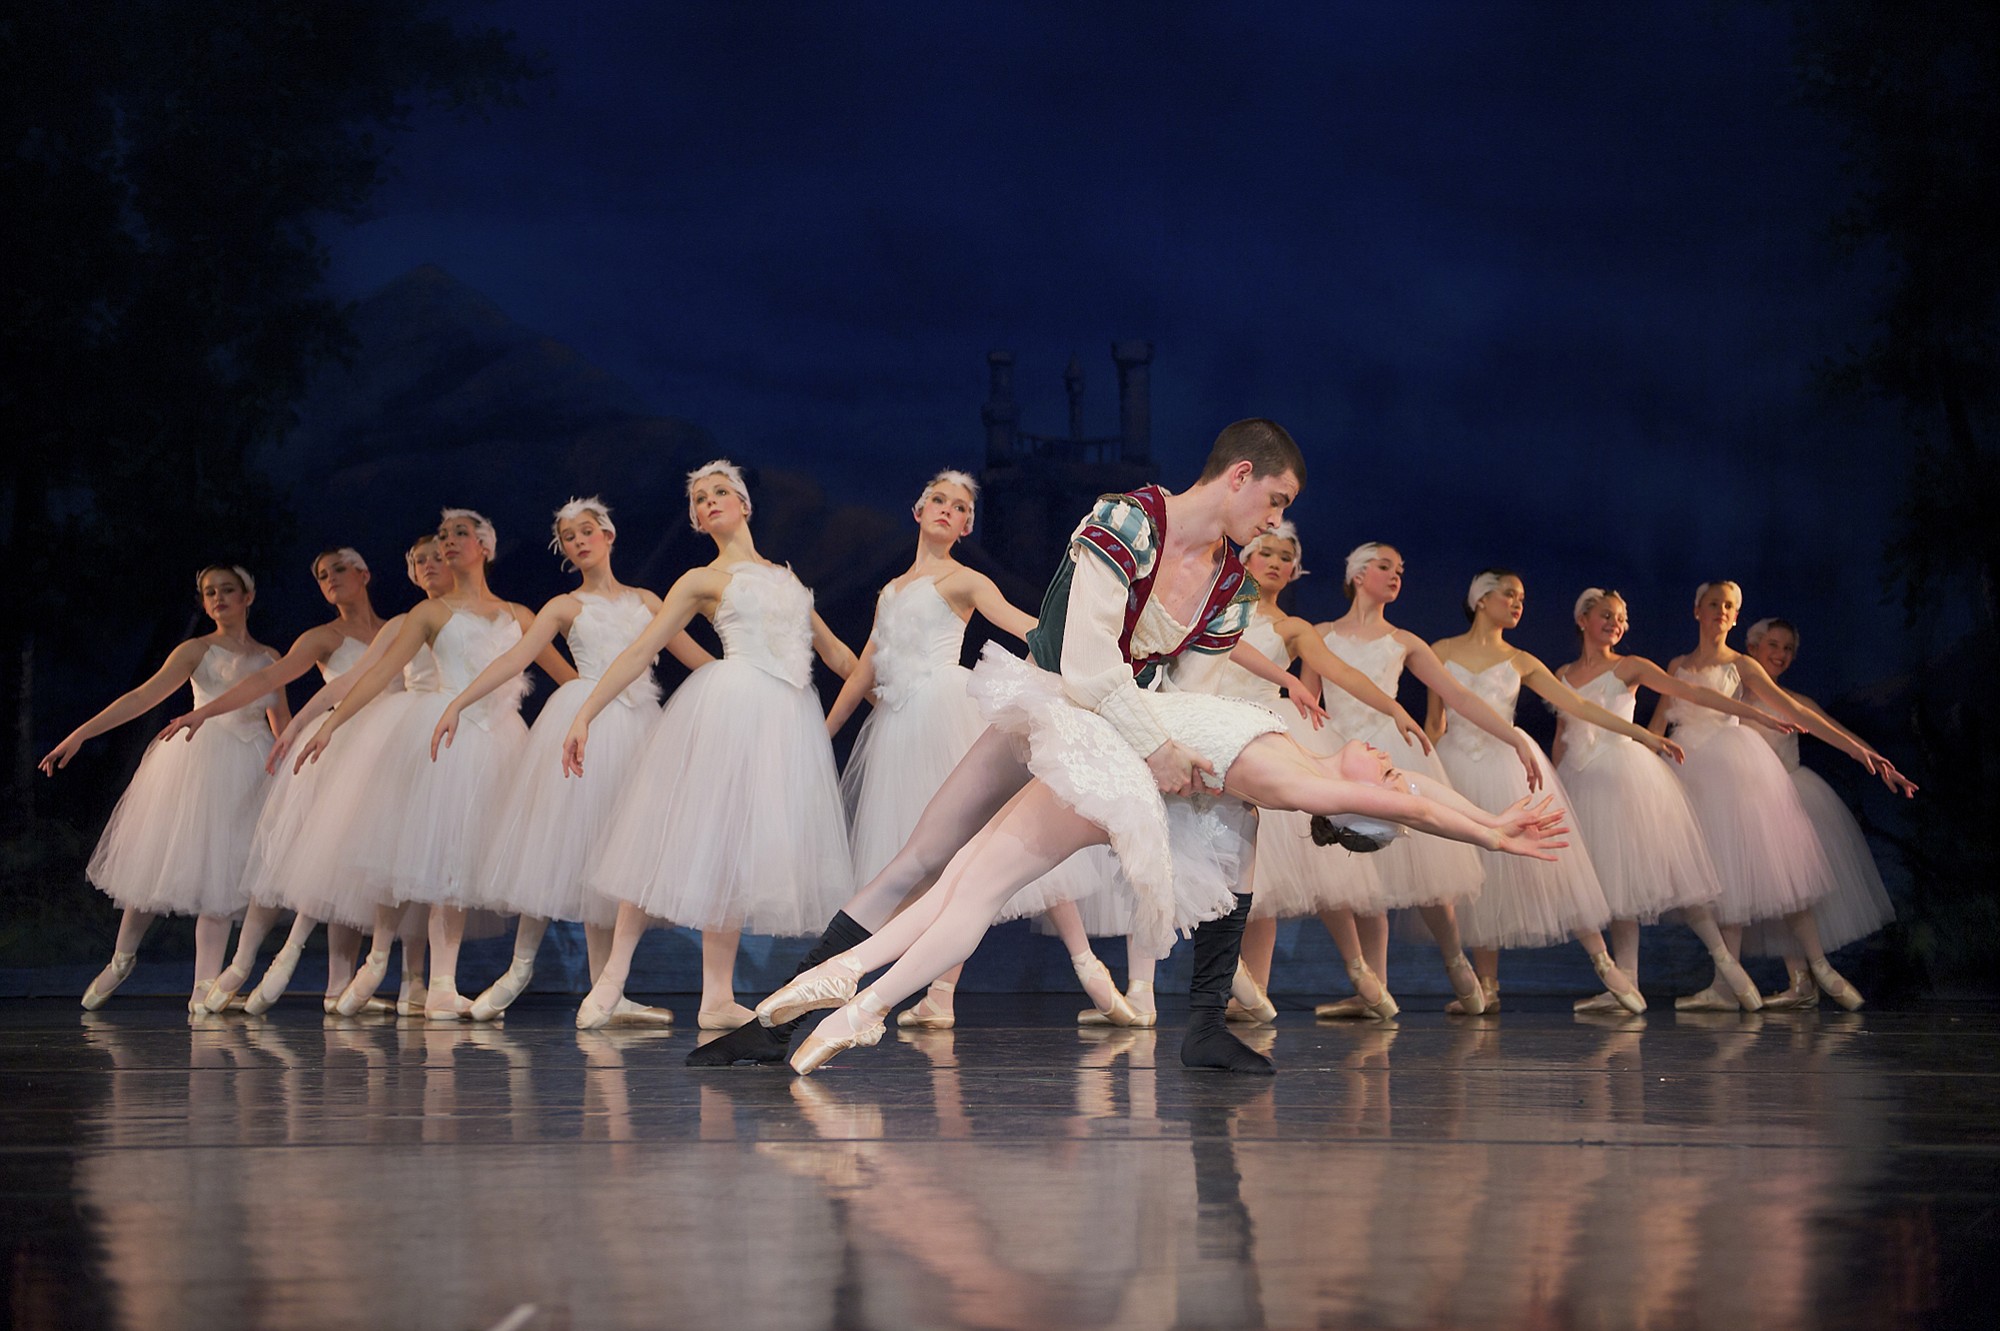 The spring production &quot;Columbia Dance Presents!&quot; features excerpts from &quot;Swan Lake&quot; and new dance pieces April 3-4 at the Royal Durst Theater.